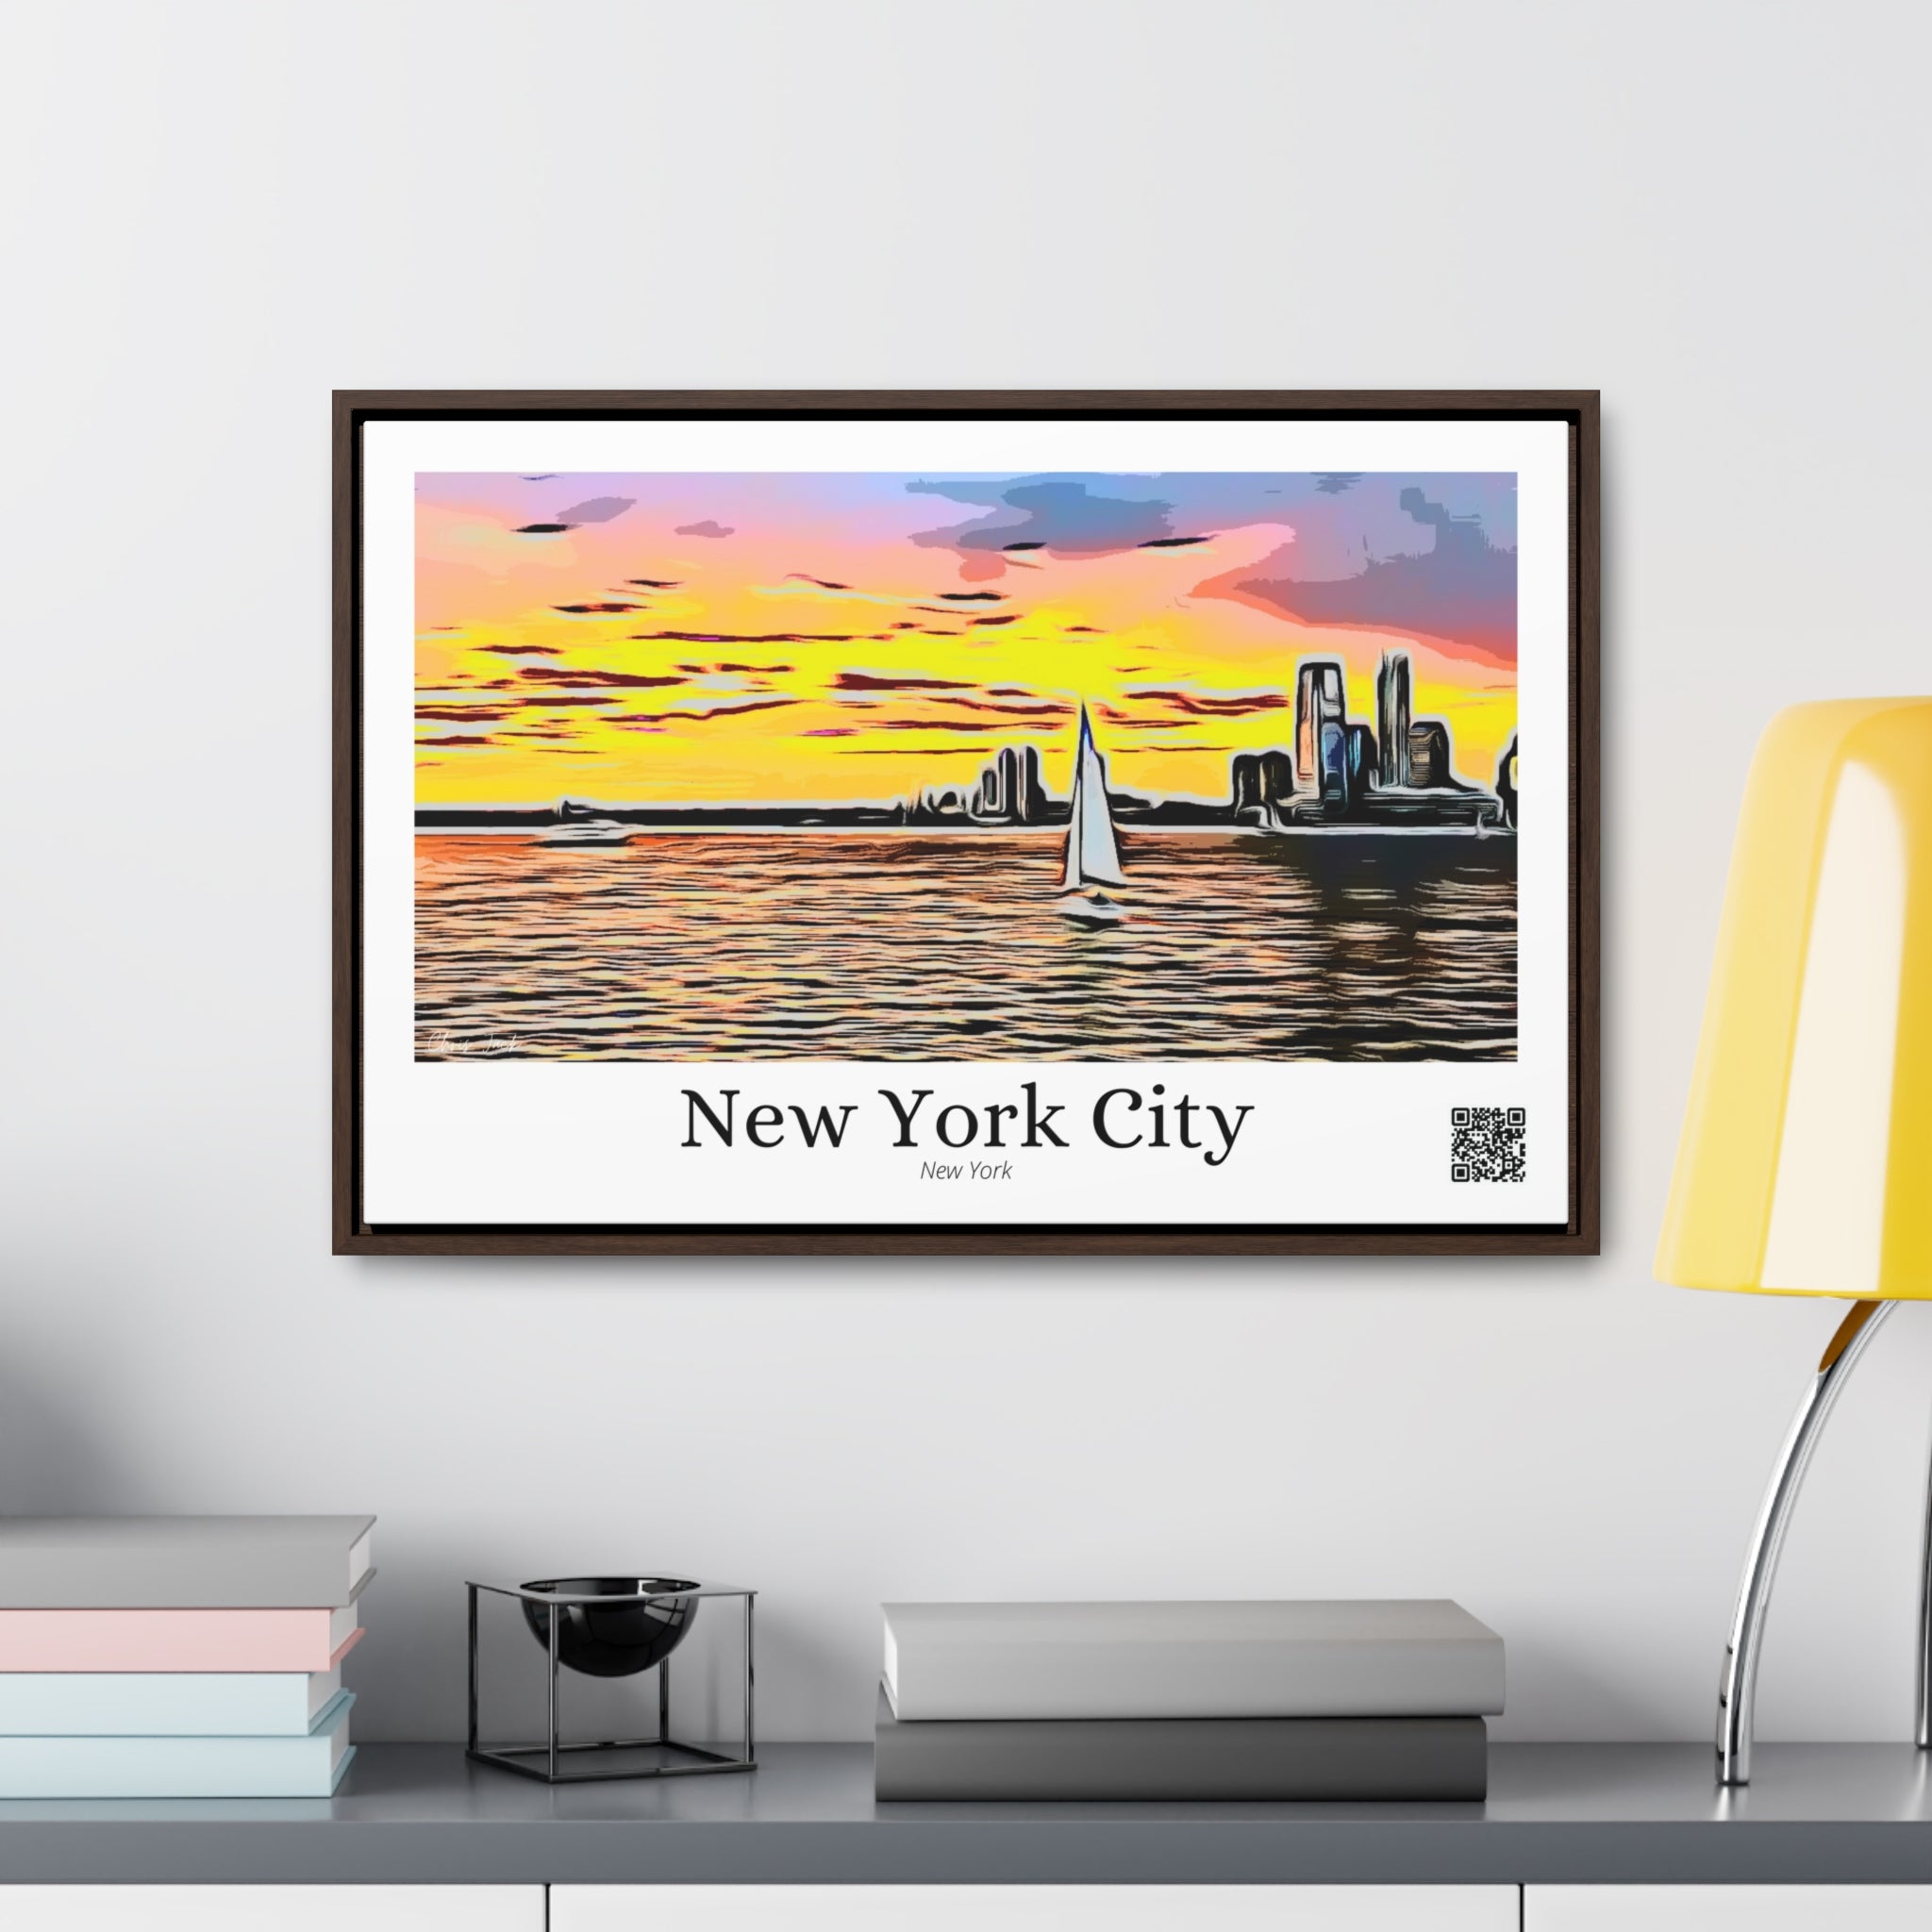 Sail into the Sunset: A New York Harbor Moment